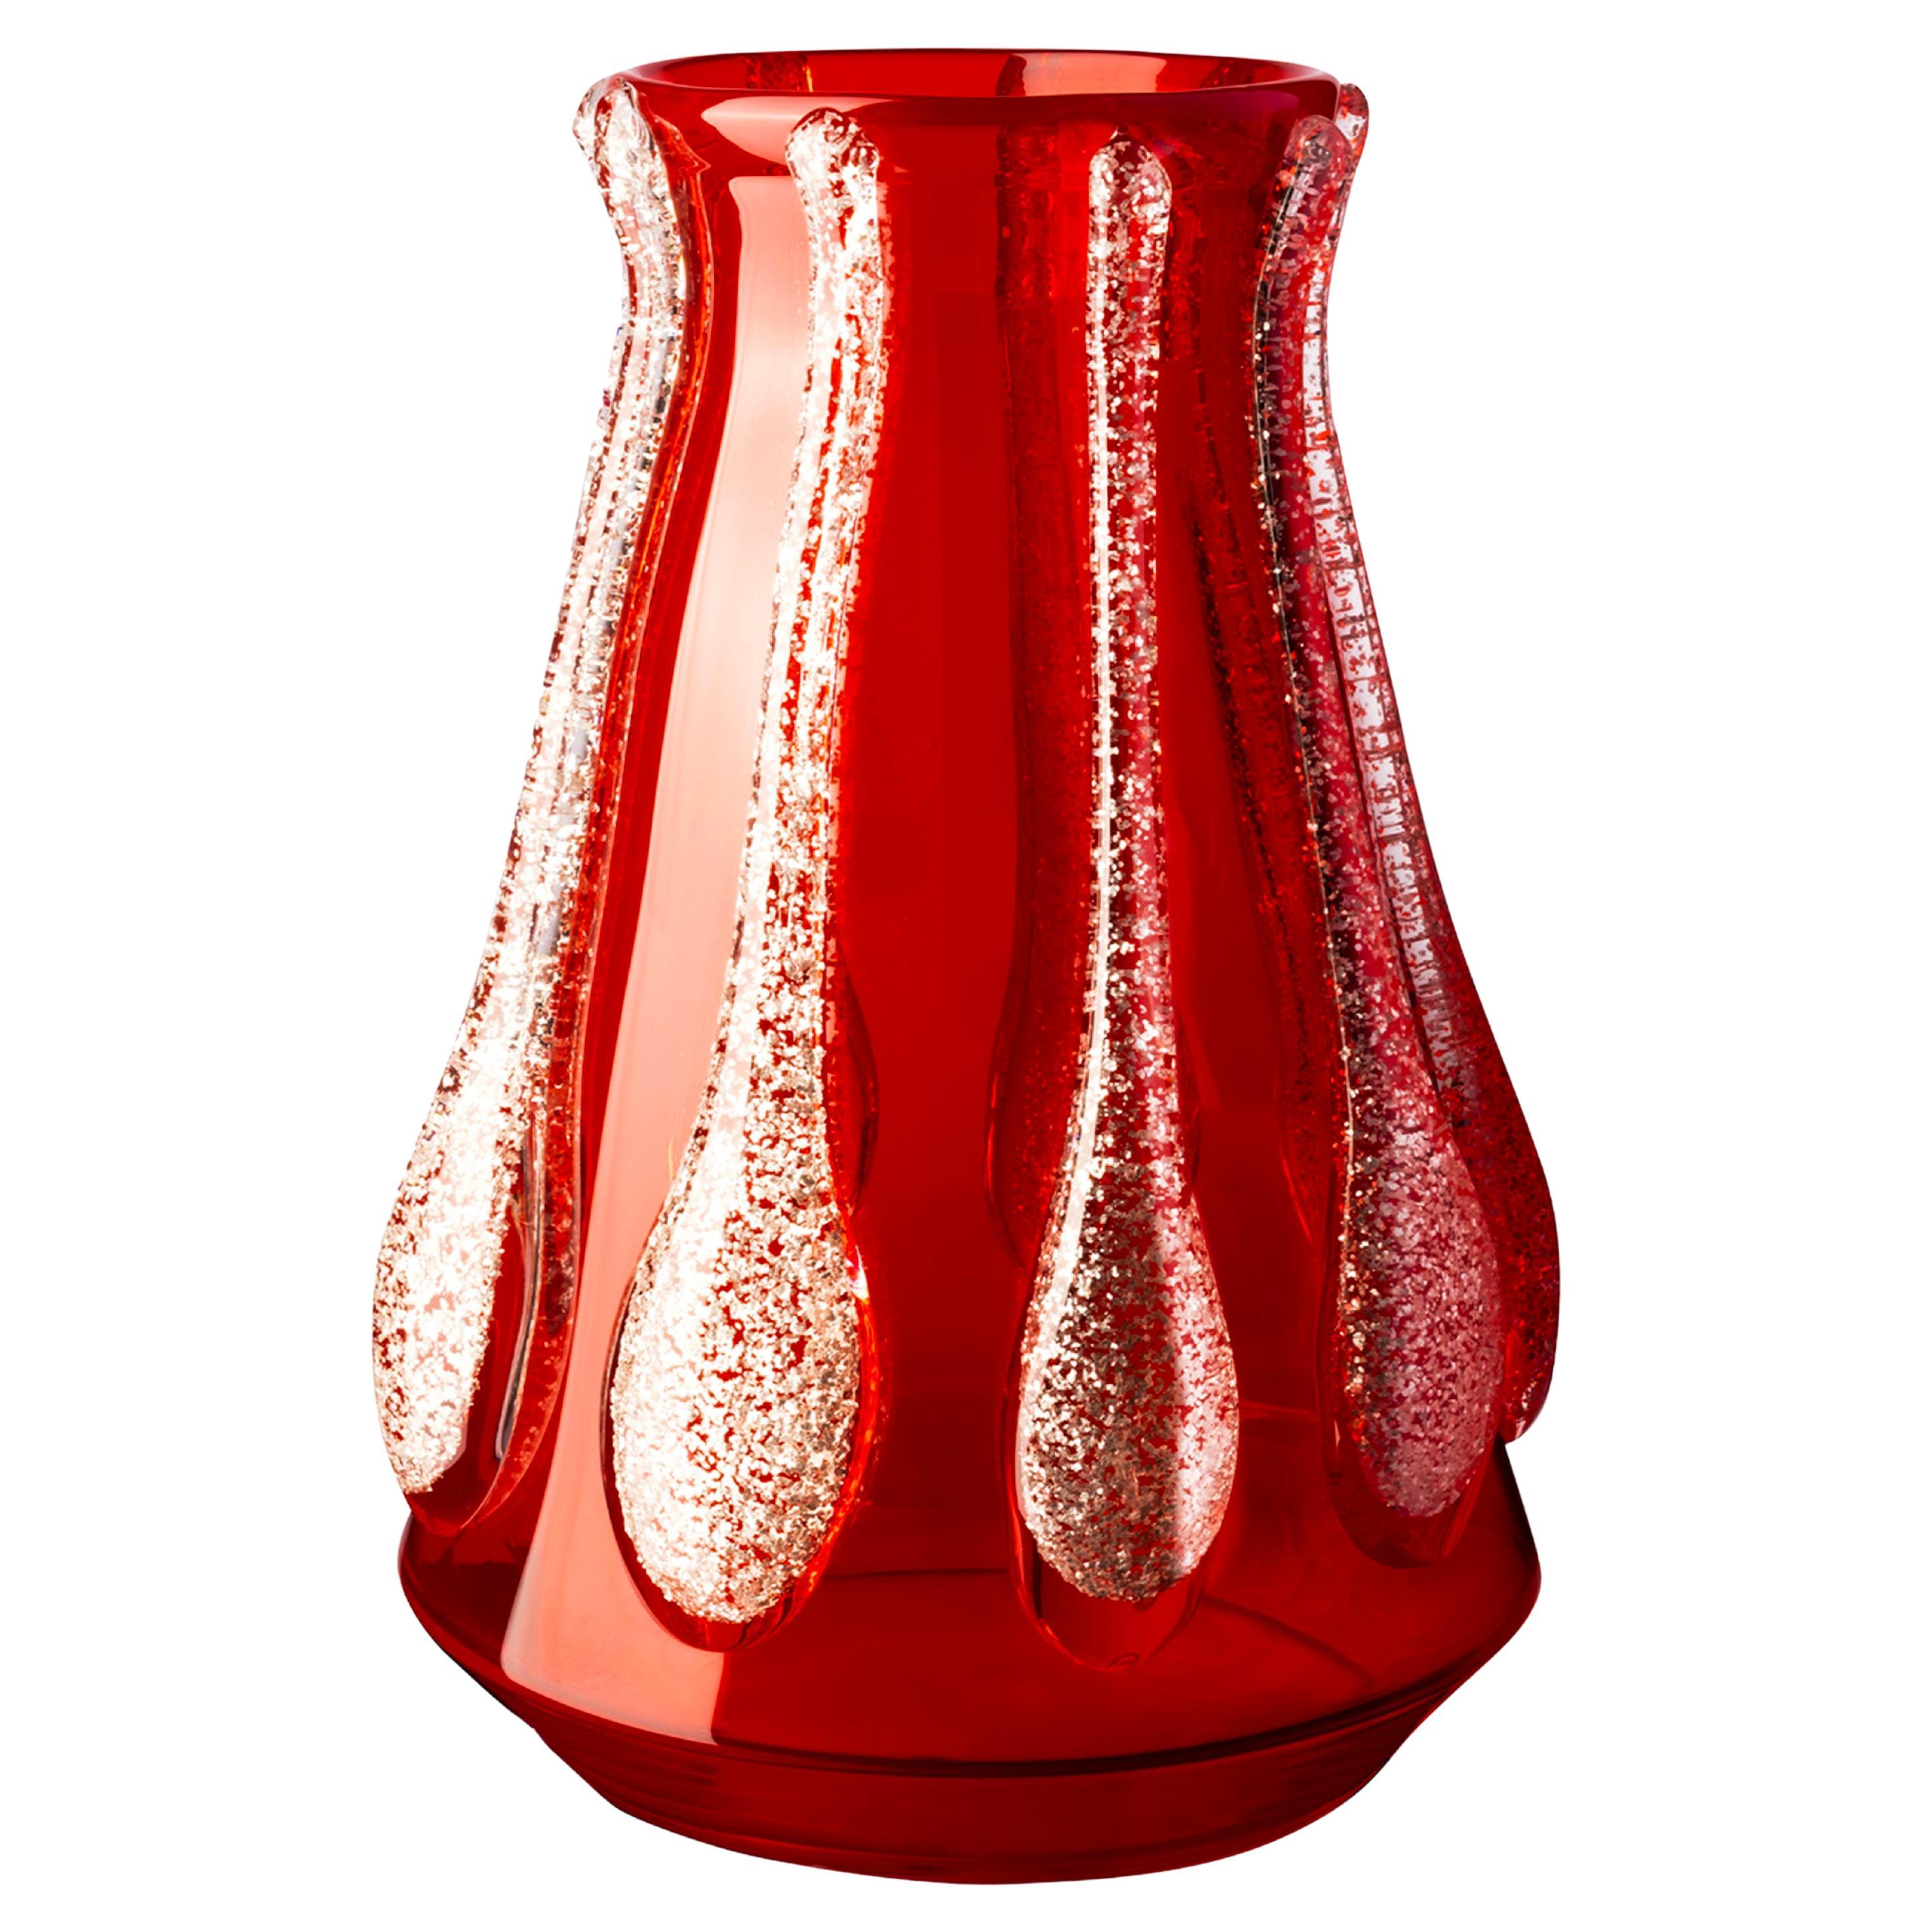 Colate Glittery Red Vase by Carlo Moretti For Sale